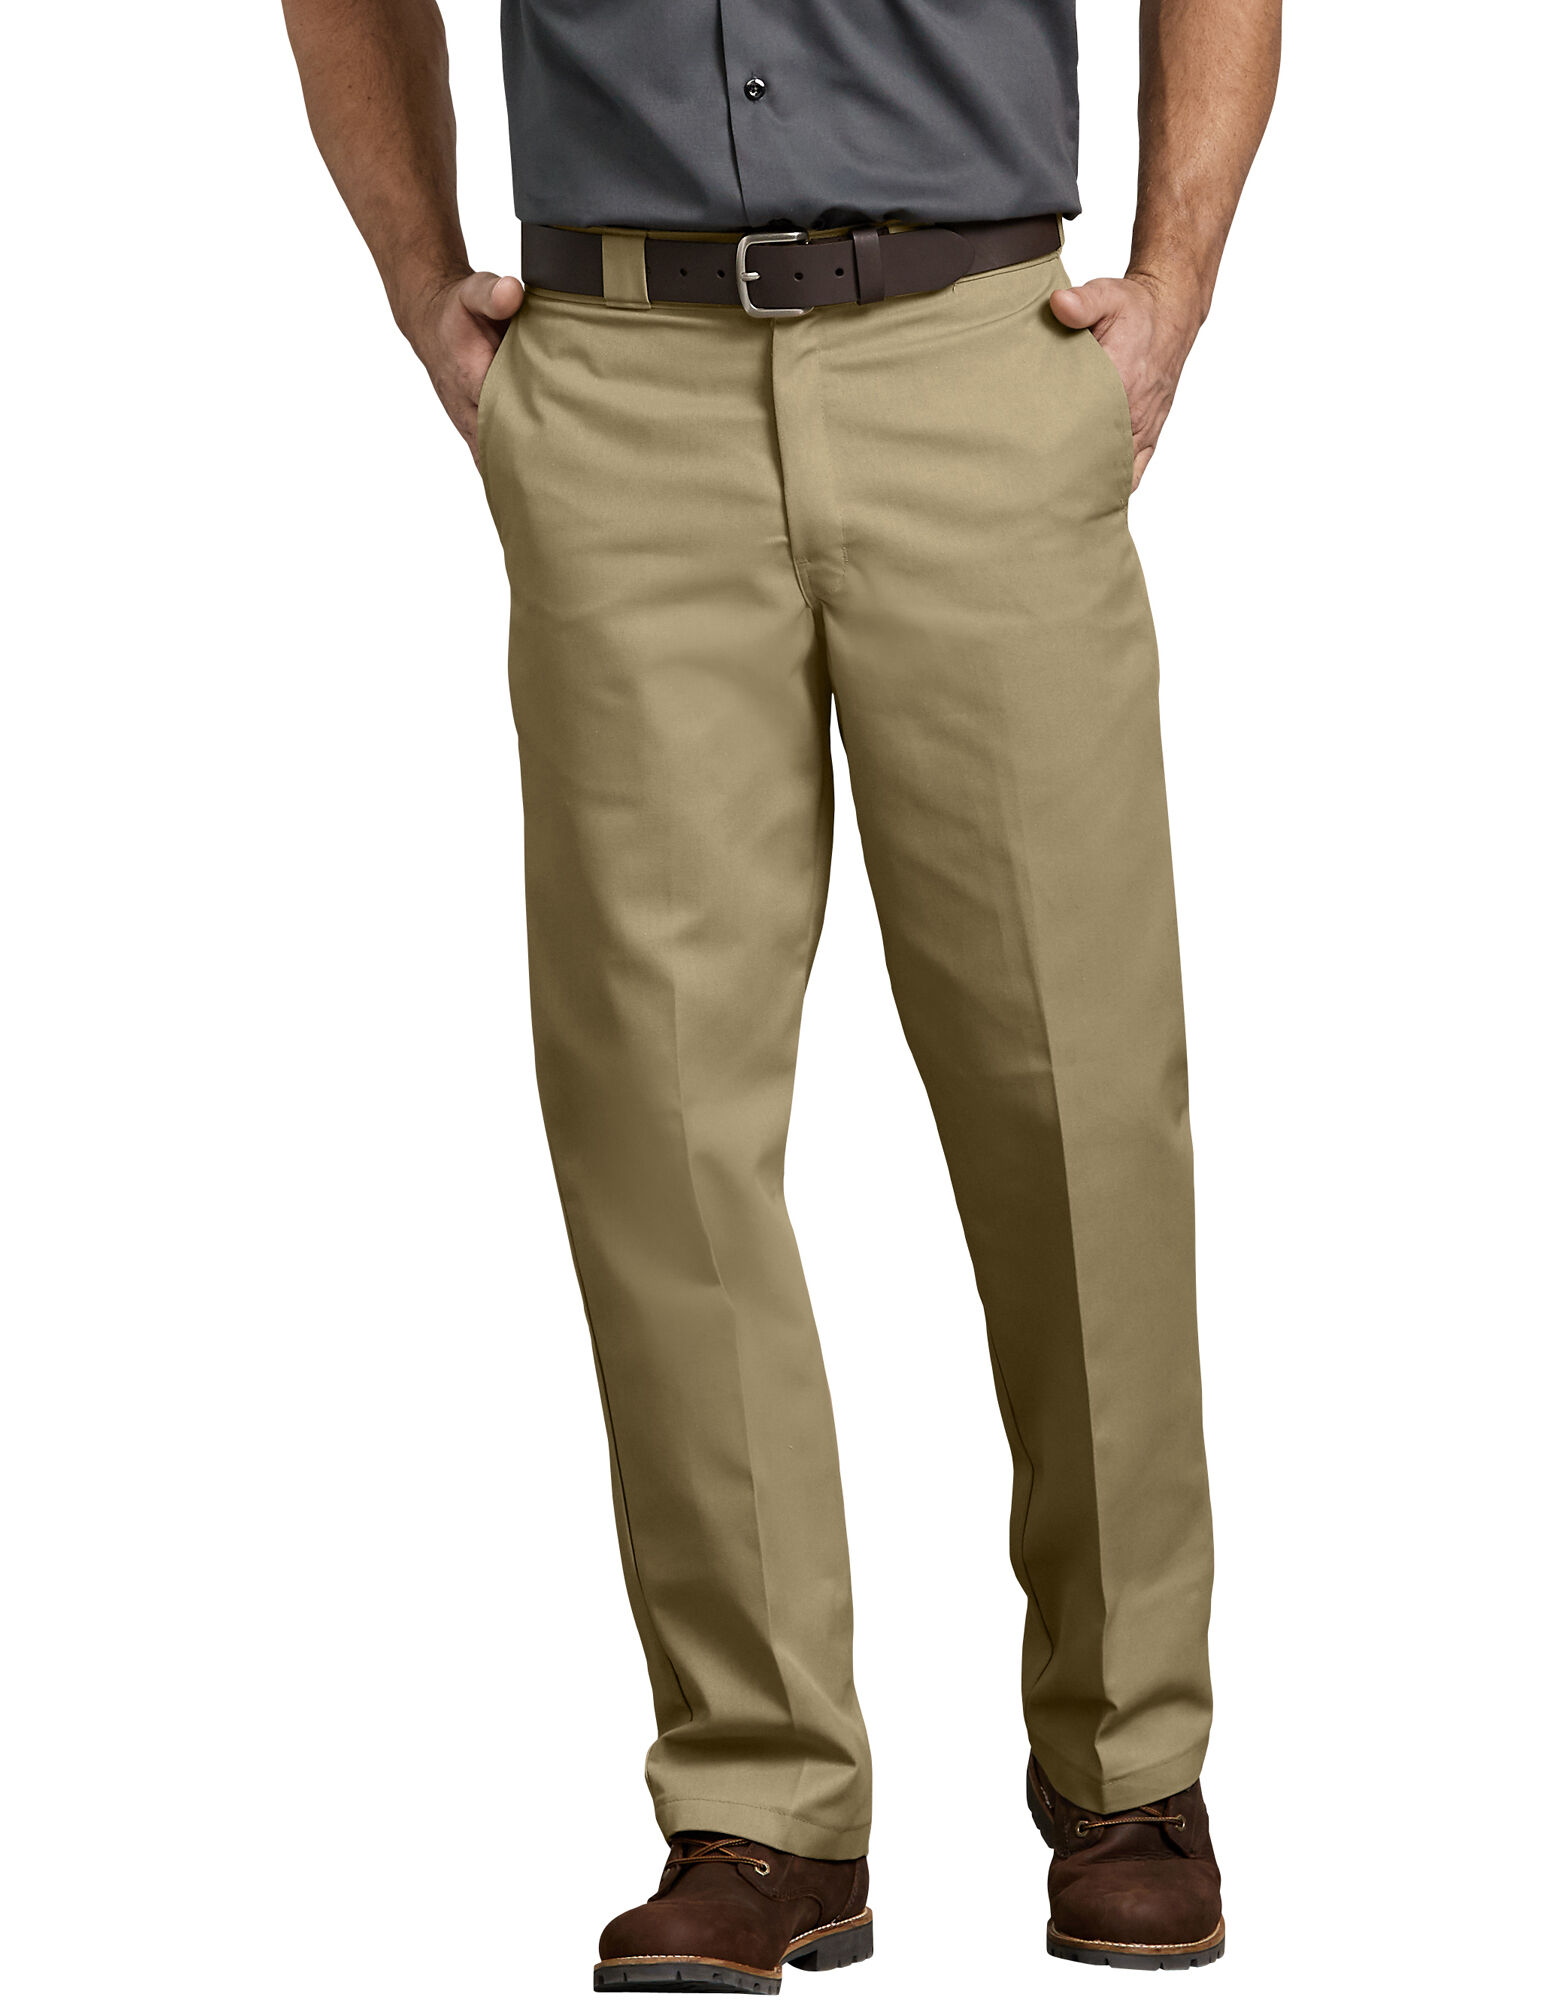 best place to buy khaki work pants